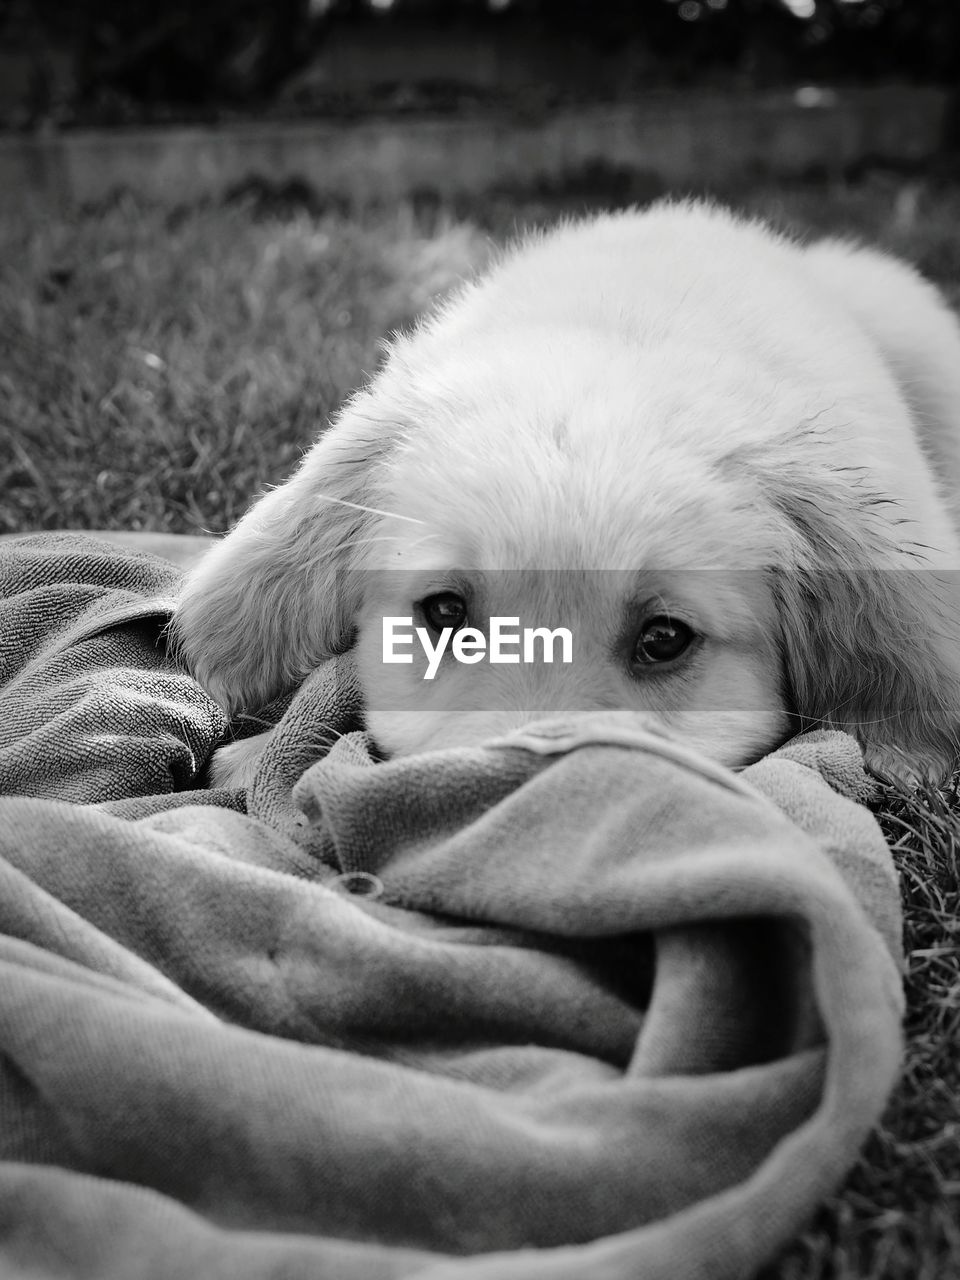 one animal, animal themes, animal, mammal, pet, domestic animals, dog, canine, black and white, golden retriever, nose, puppy, white, portrait, monochrome, monochrome photography, no people, relaxation, cute, carnivore, looking at camera, close-up, animal body part, young animal, lying down, animal head